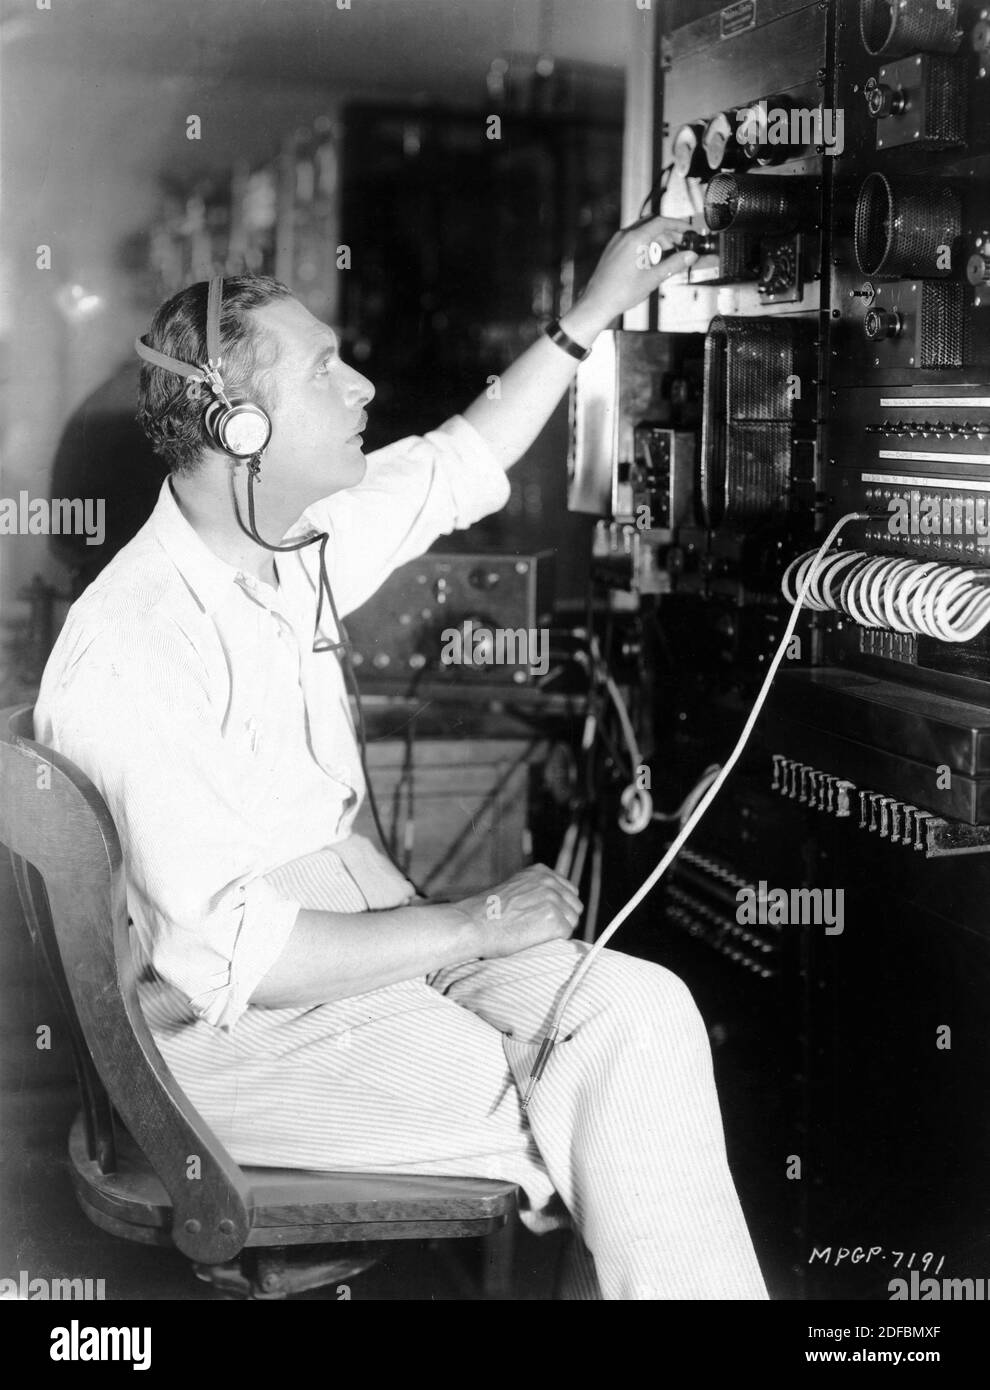 LEW CODY in the Control Room of KFI Radio Station during Early Experiment in Sound for NORMA SHEARER and LEW CODY in A SLAVE OF FASHION 1925 director HOBART HENLEY Metro Goldwyn Mayer Stock Photo